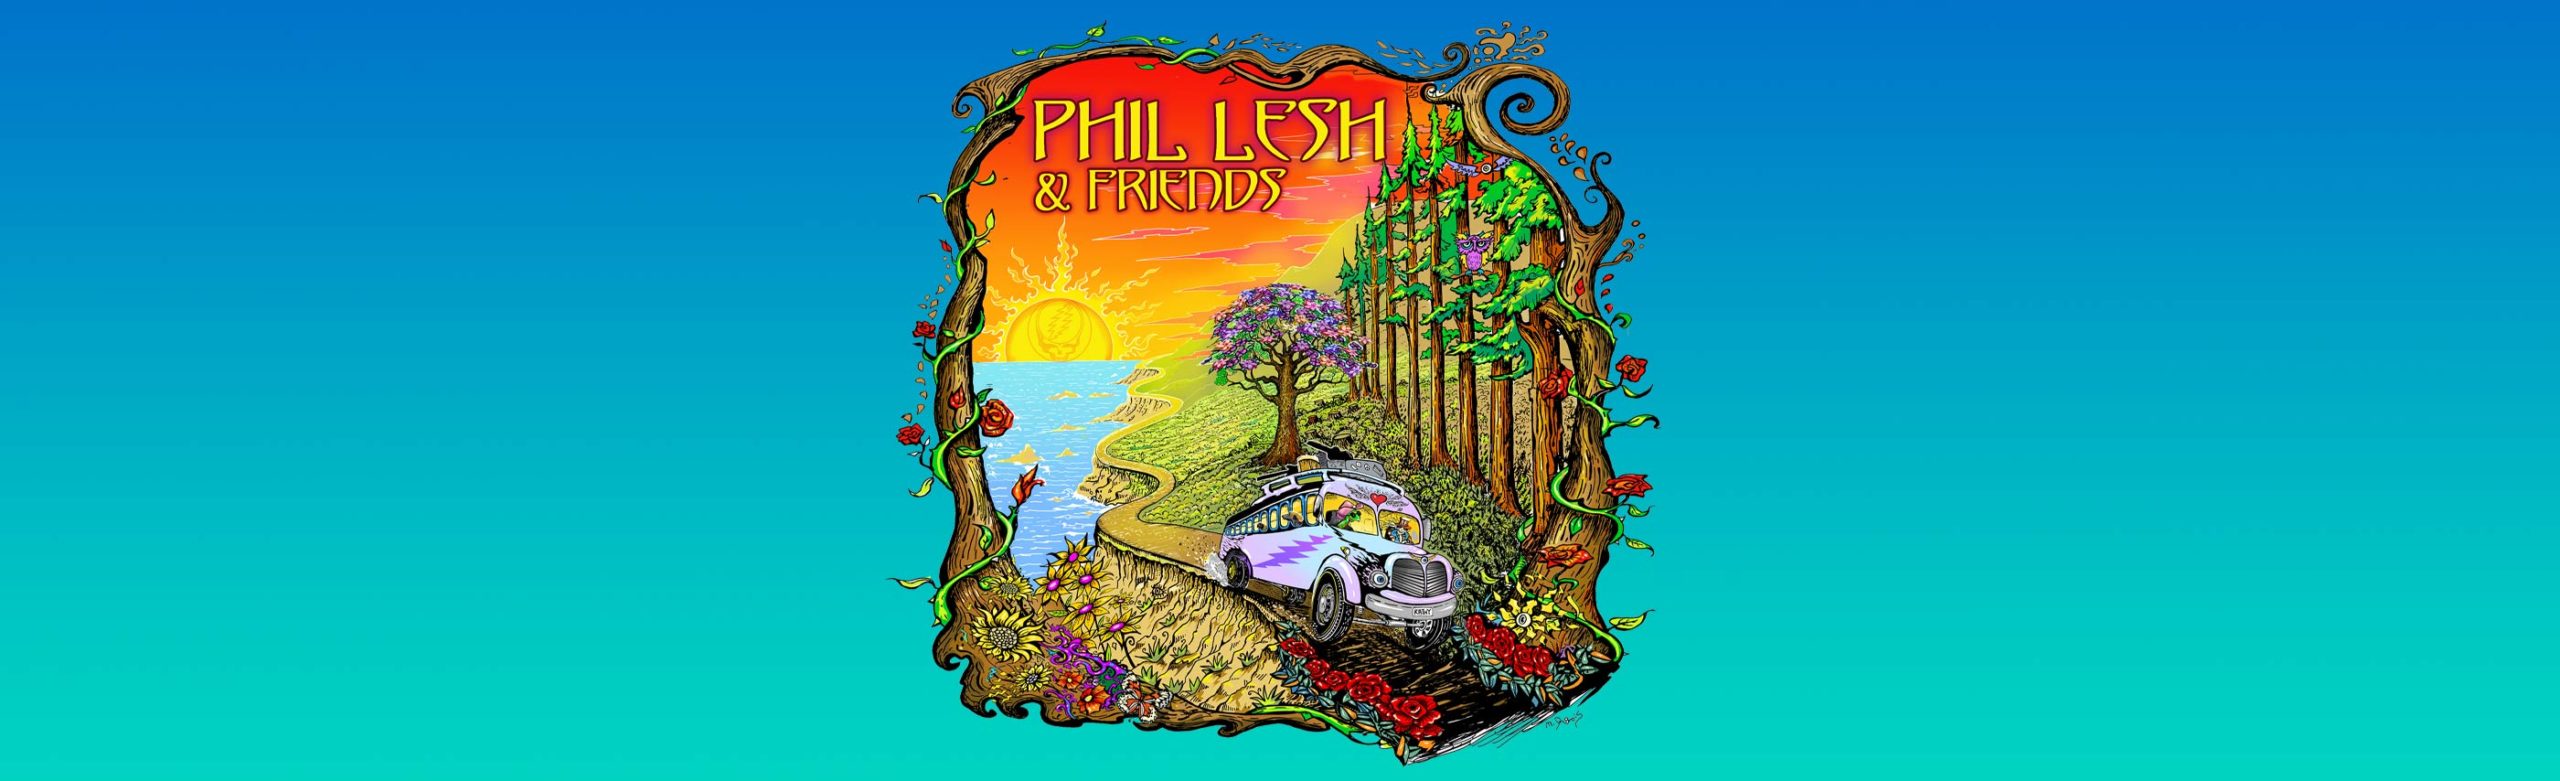 Phil Lesh and Friends Announce Concert at KettleHouse Amphitheater Image